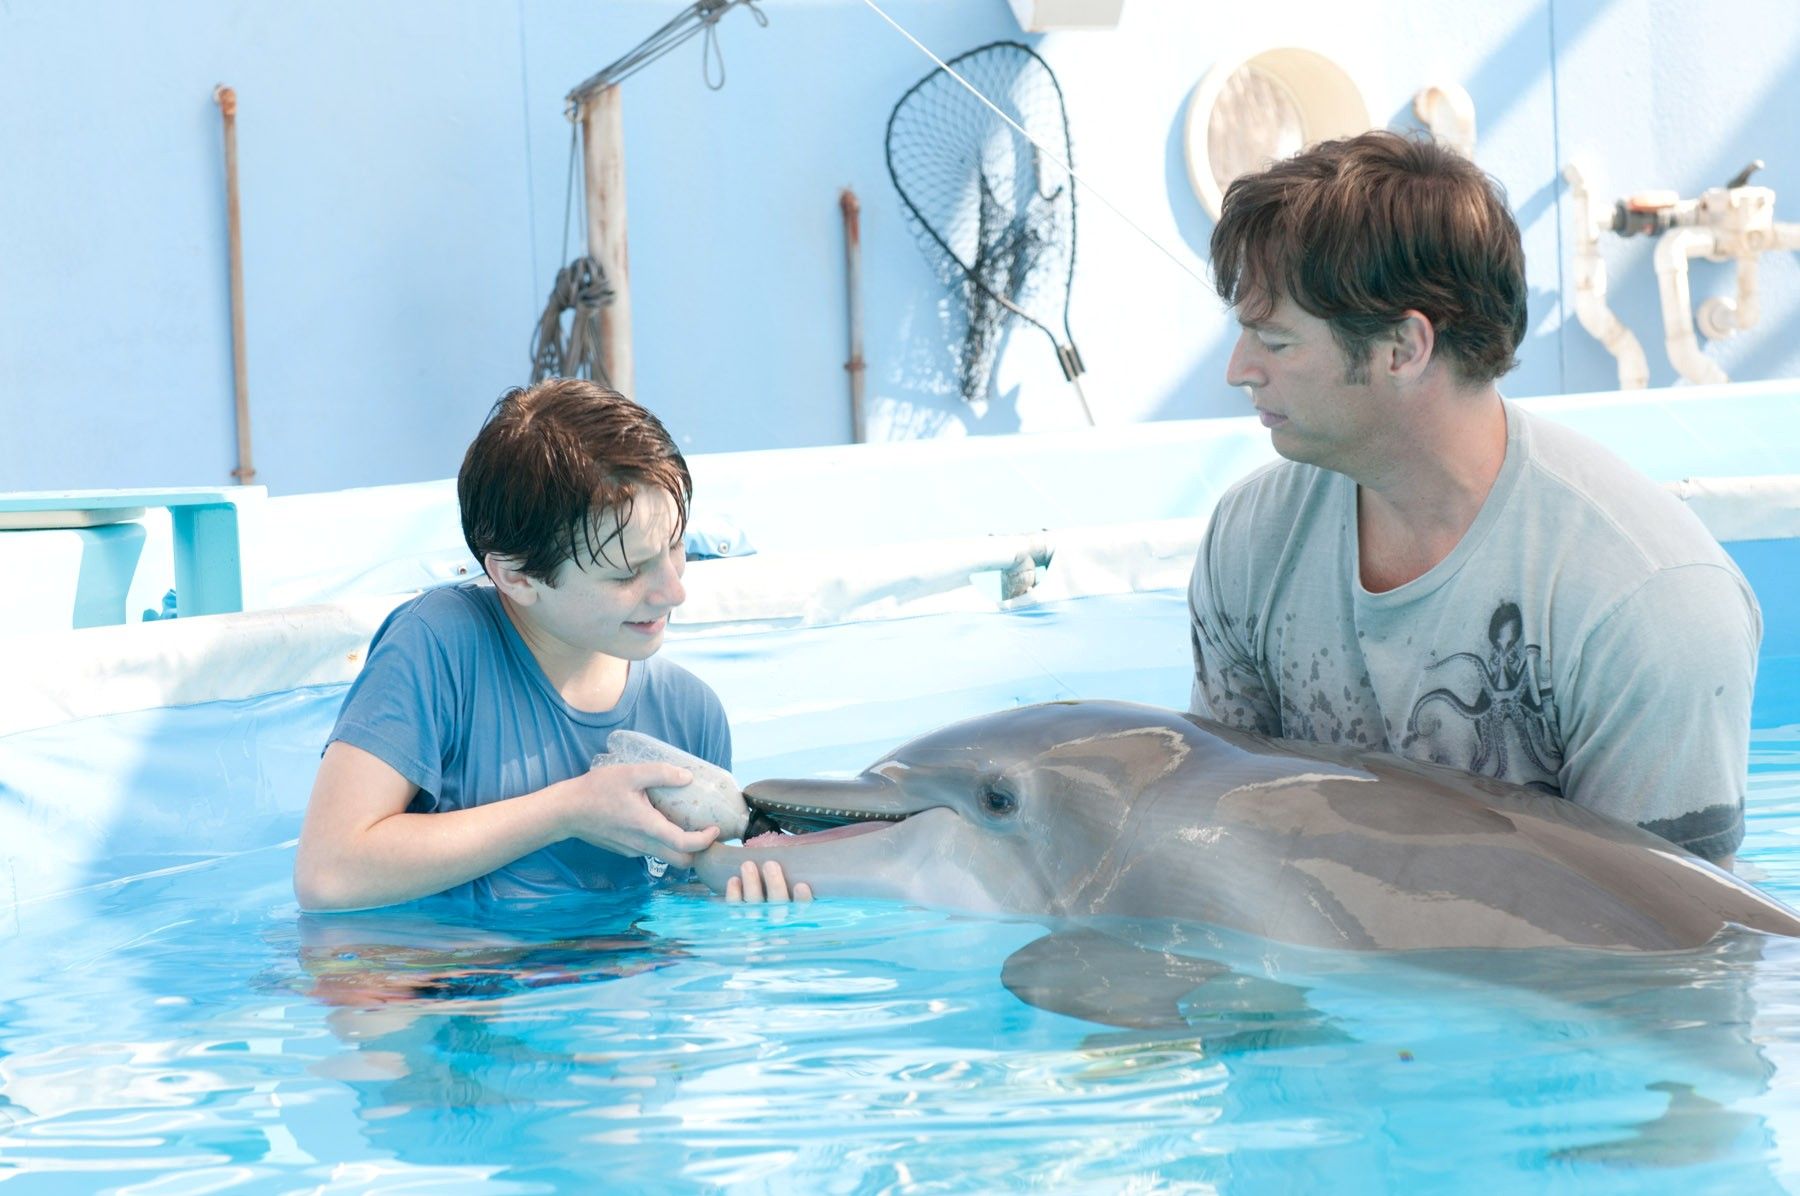 Nathan Gamble and Harry Connick Jr. share a scene with WinterFinally, we asked Morgan Freeman if he has had an opportunity to have any interaction with Winter the dolphin. Only a little, he answered. I noticed when I got here, you know I've never had any intimate relationships with a dolphin. Horses, dogs, chickens, geese, penguins, and things like that but not fish. So I was trying to ingratiate myself, she's just like a little child. She shies away and then she comes back. Then finally you can